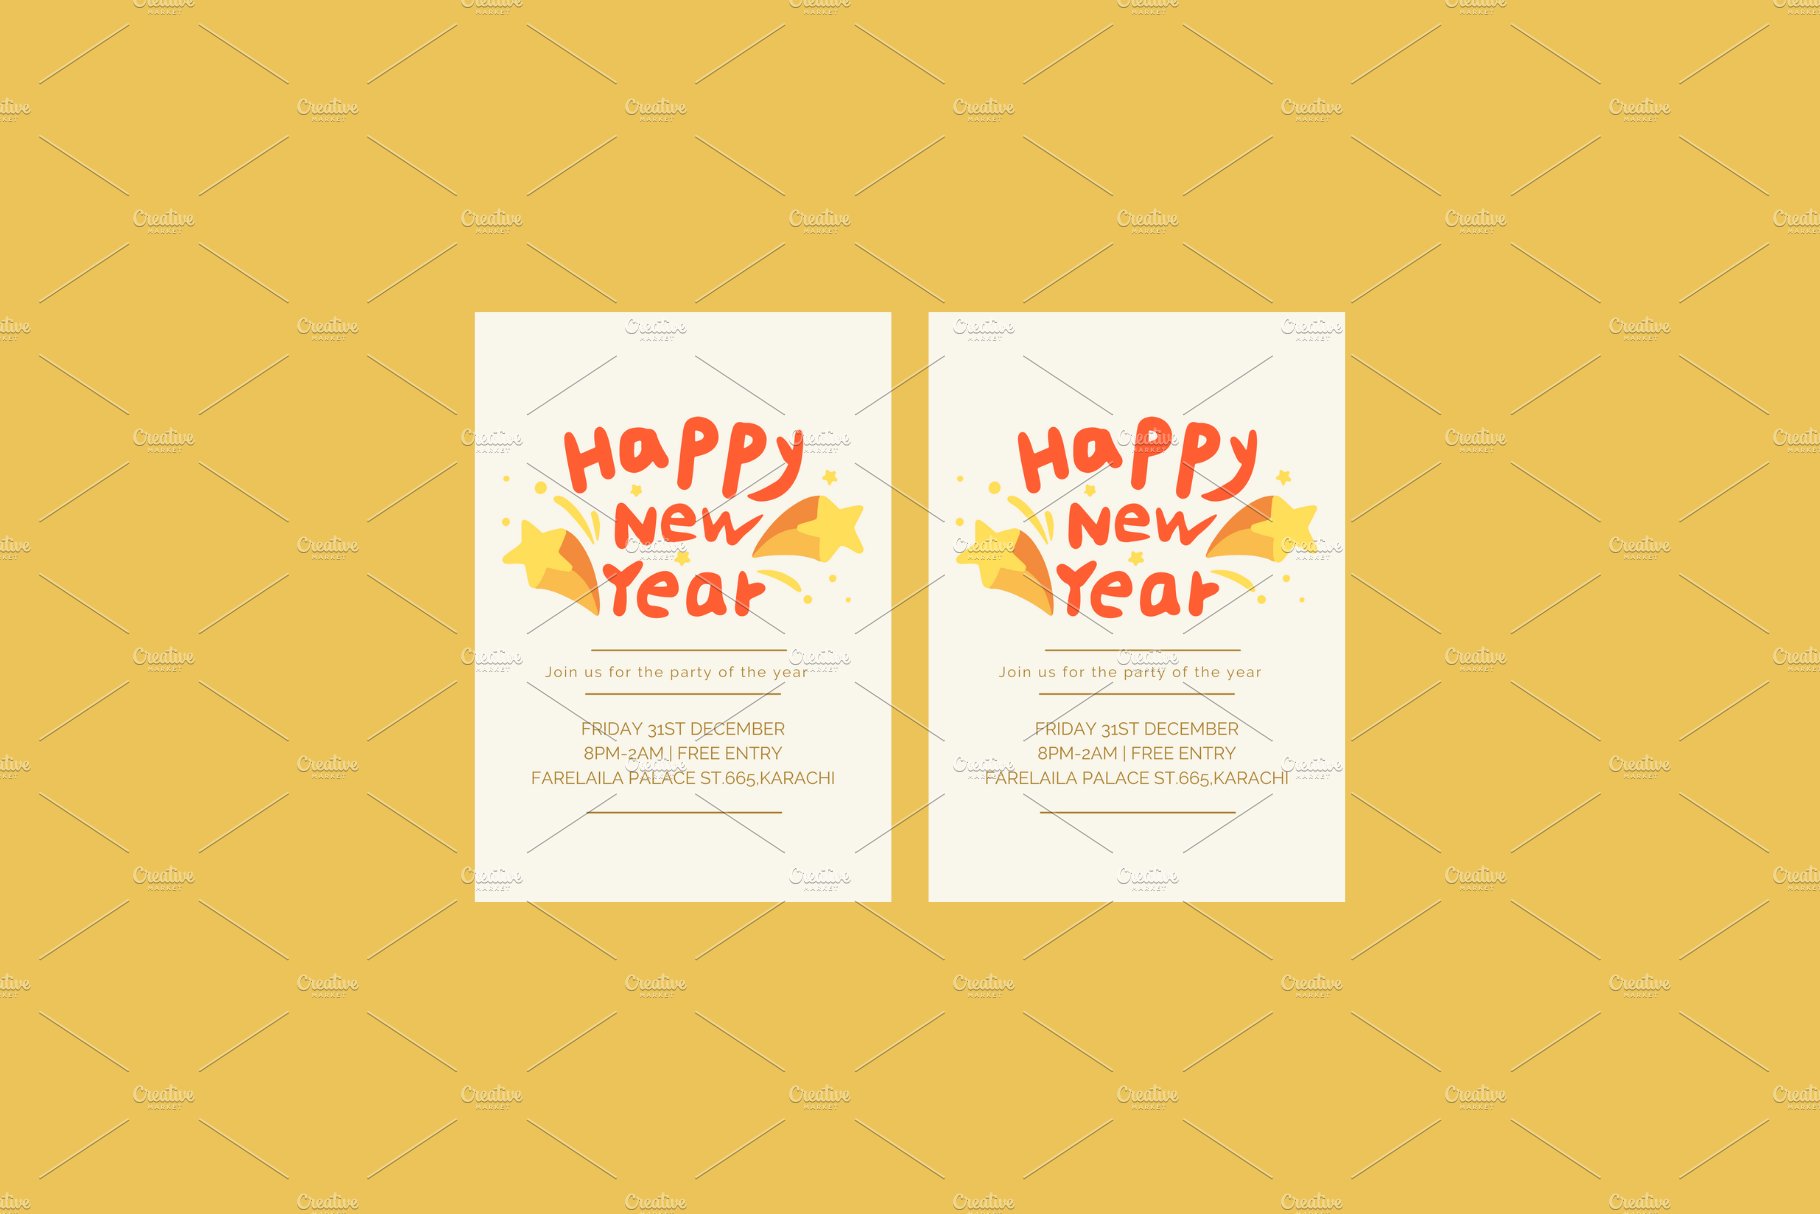 New year party invitation cover image.